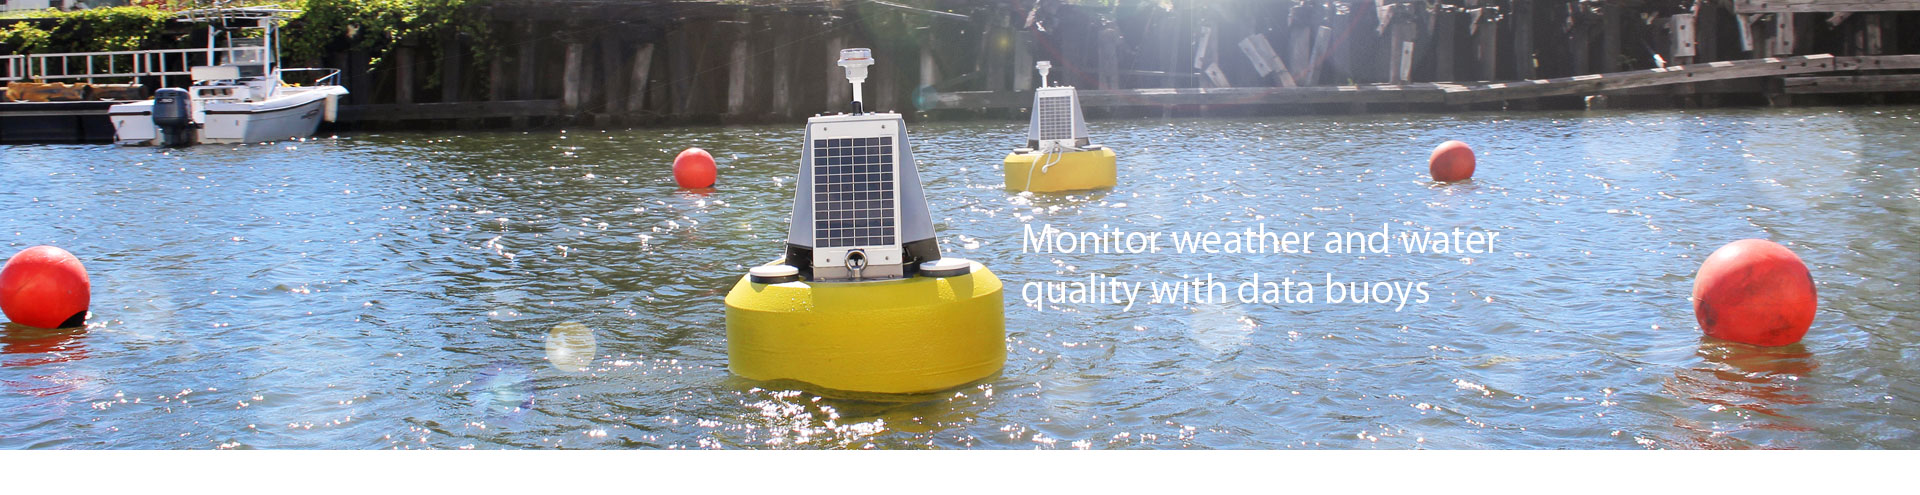 Monitor weather and water quality with data buoys